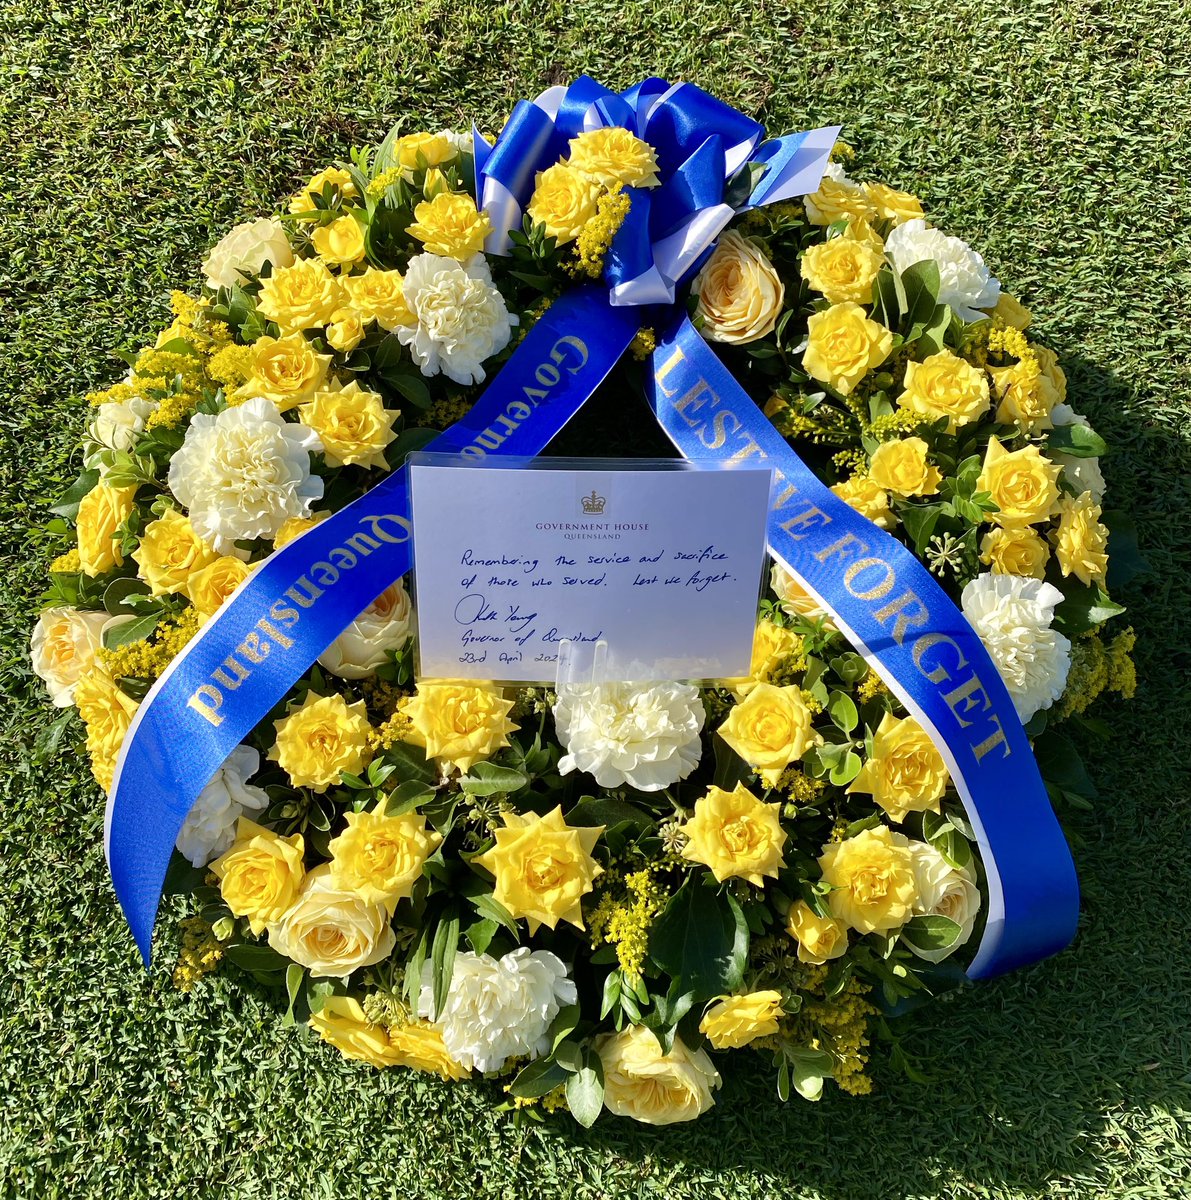 The Governor attended the Queensland Schools' ANZAC Commemoration Service at #ANZAC Square in Brisbane this morning. Her Excellency is Patron of the ANZAC Day Commemoration Committee (Queensland) and ANZAC Day Parade Brisbane. @RSLQueensland @AnzacDay #LestWeForget